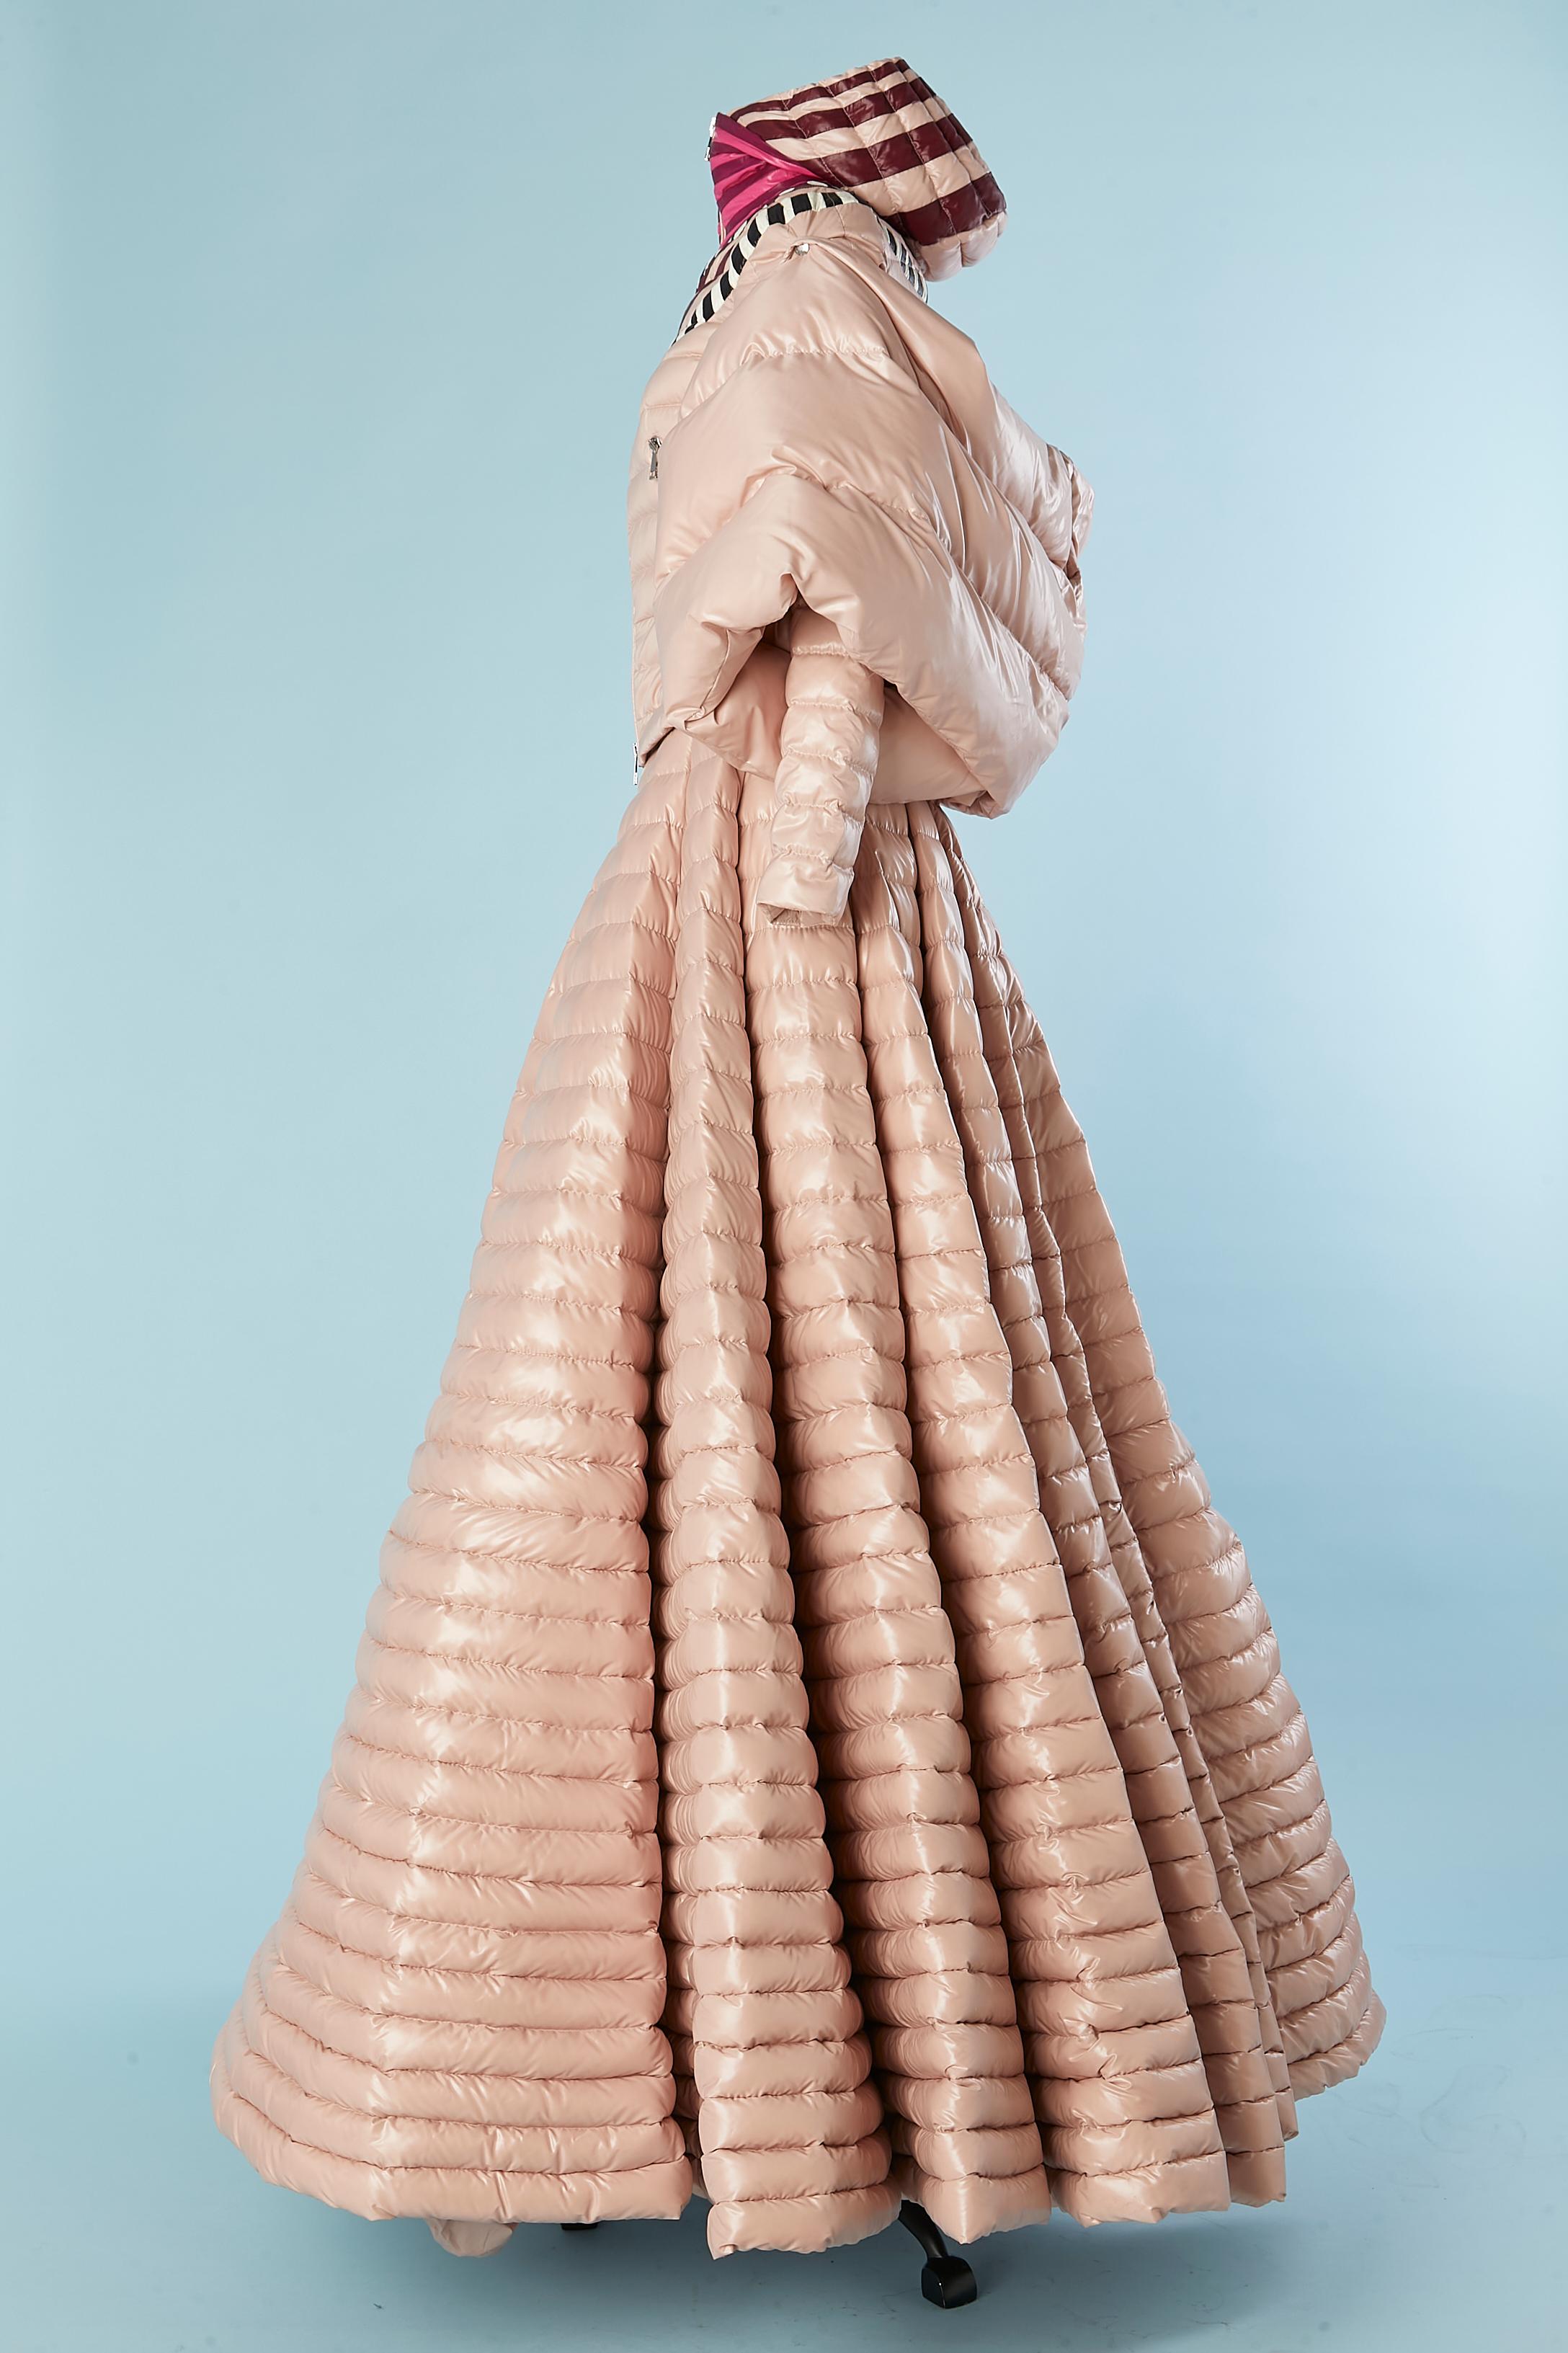 Goose down jacket, cape and crinoline skirt Moncler Genius by Pierpaolo Piccioli For Sale 1